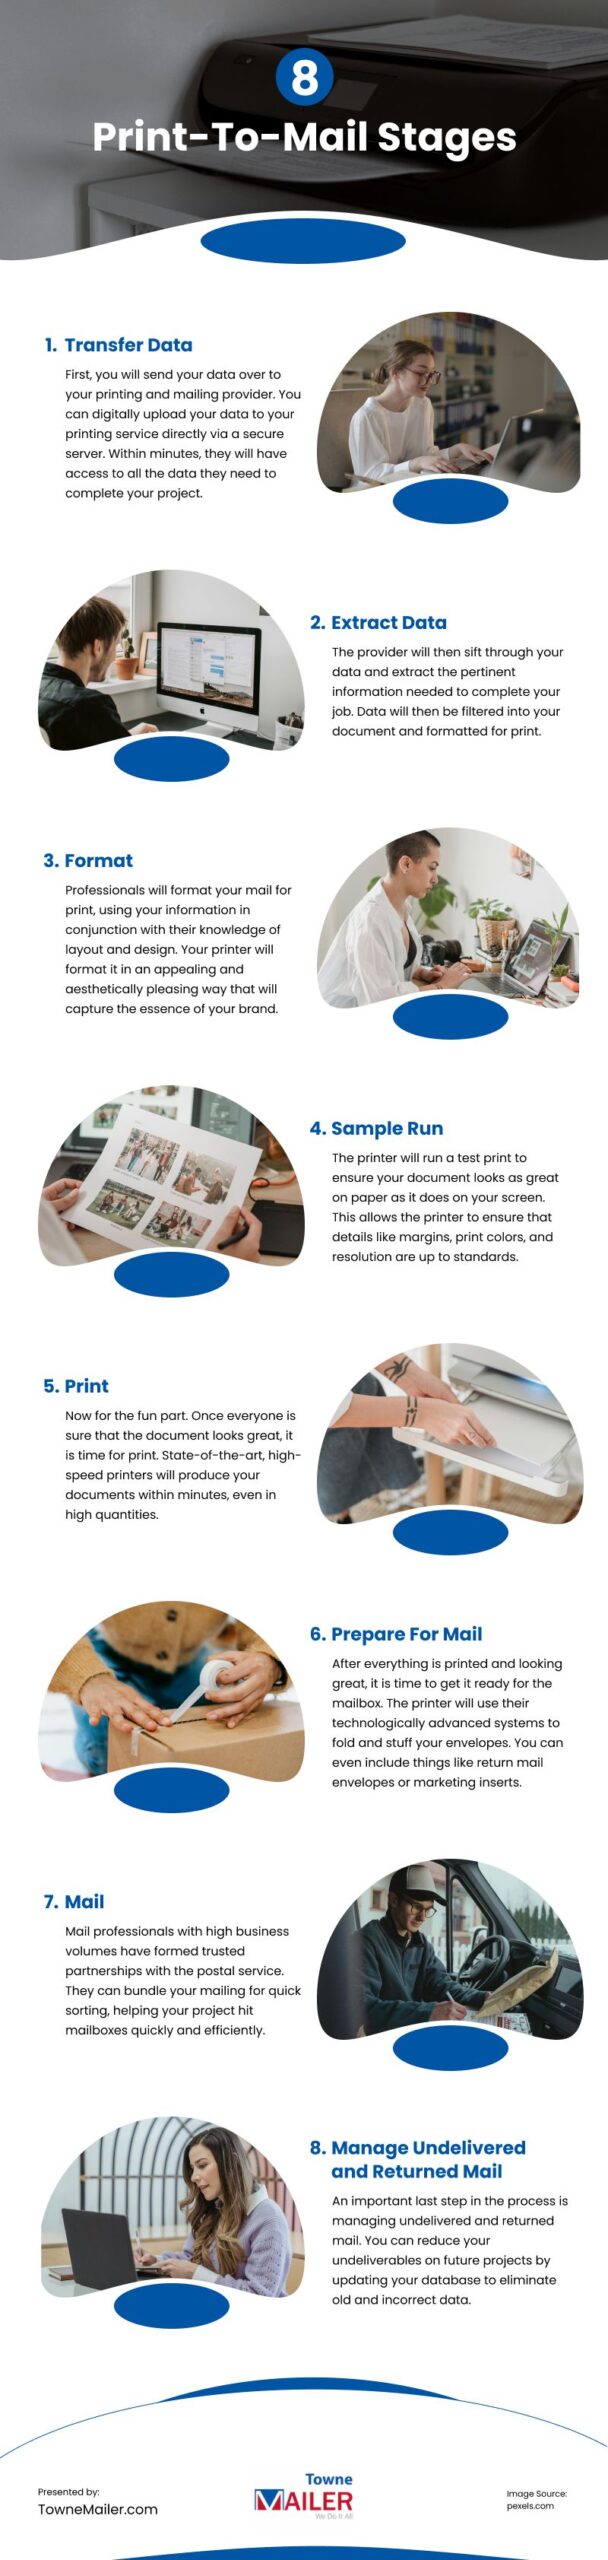 8 Print-To-Mail Stages Infographic